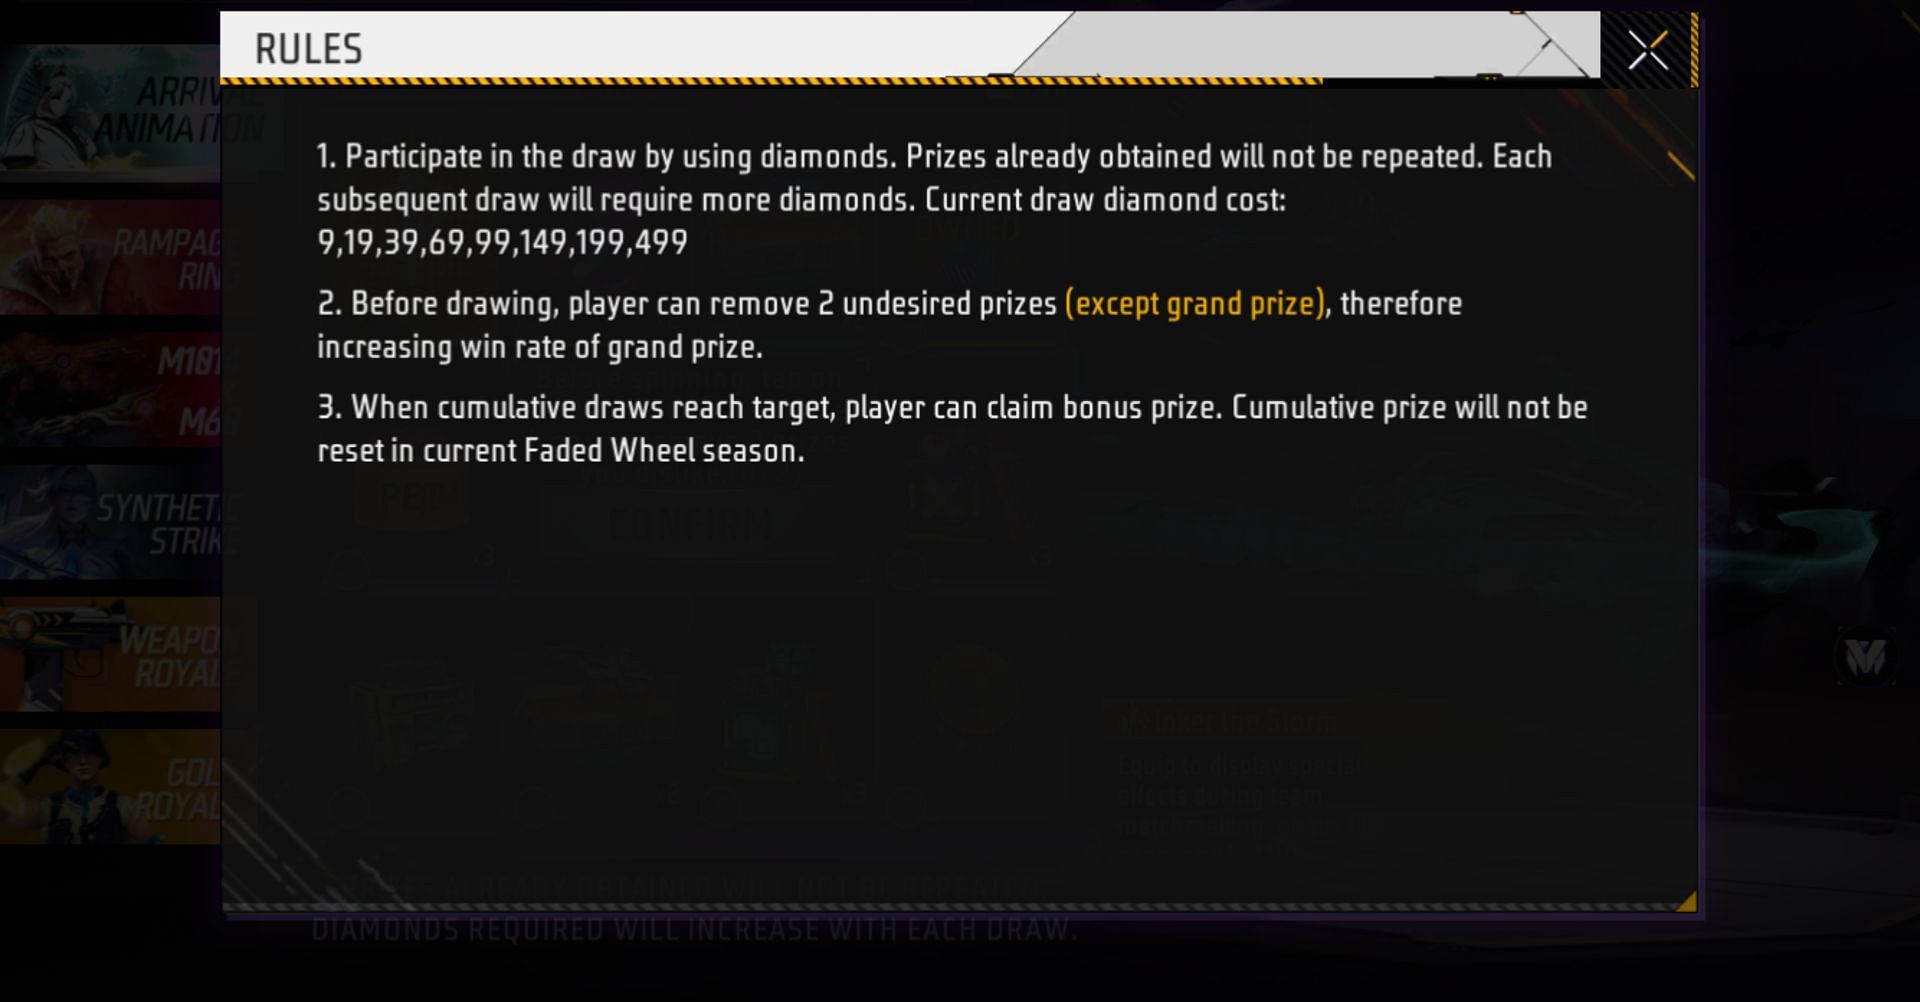 These are the rules of the Faded Wheel (Image via Garena)